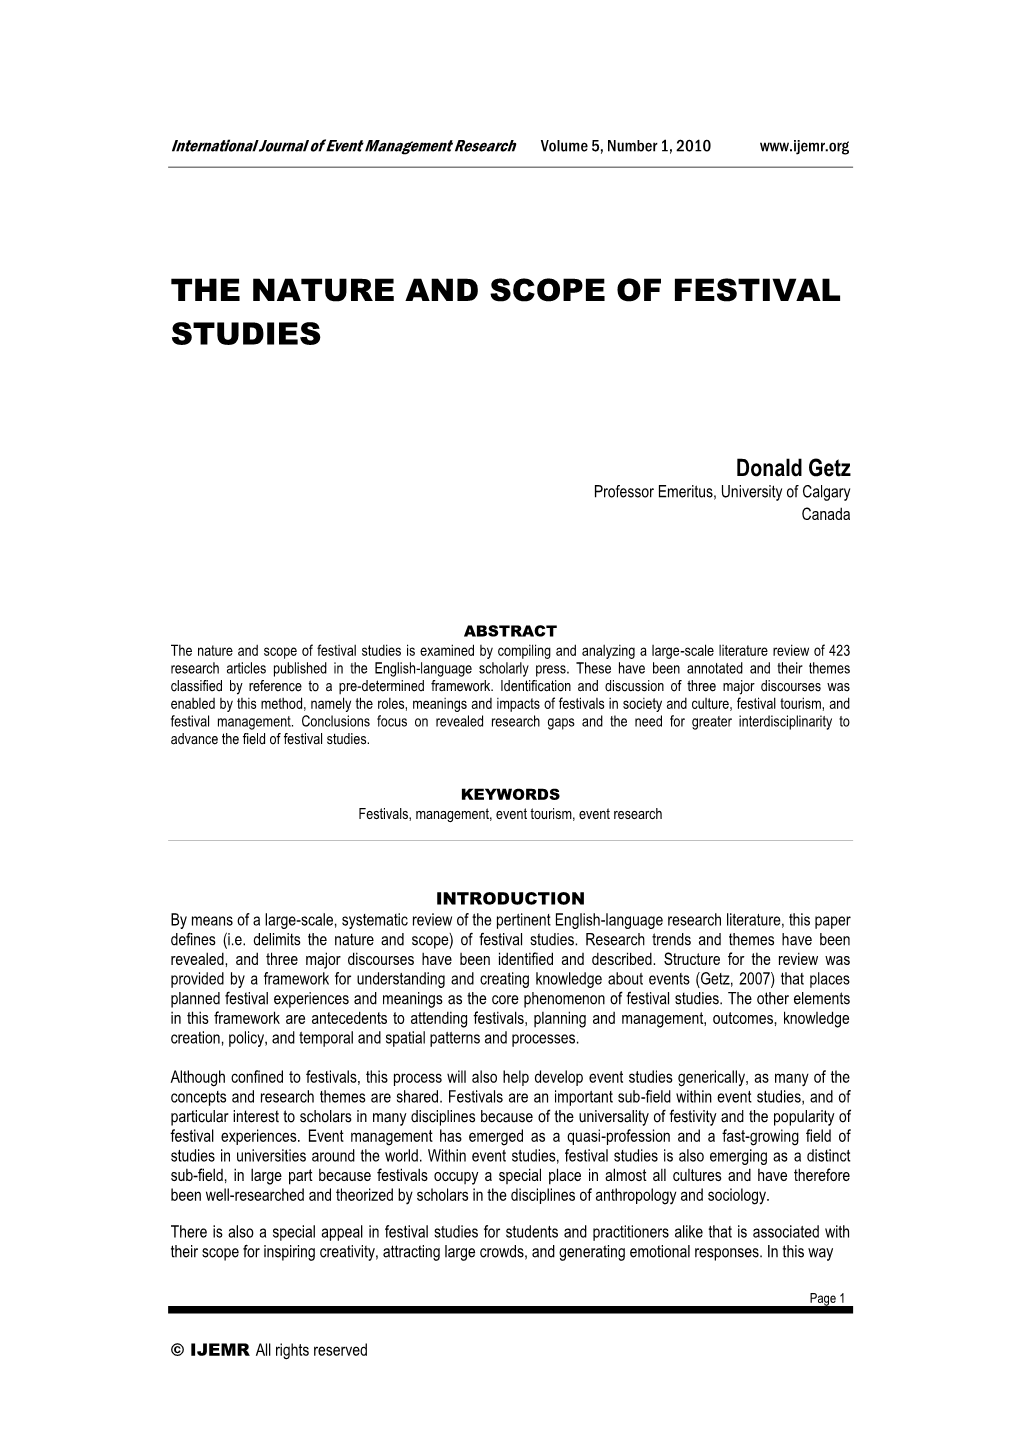 The Nature and Scope of Festival Studies